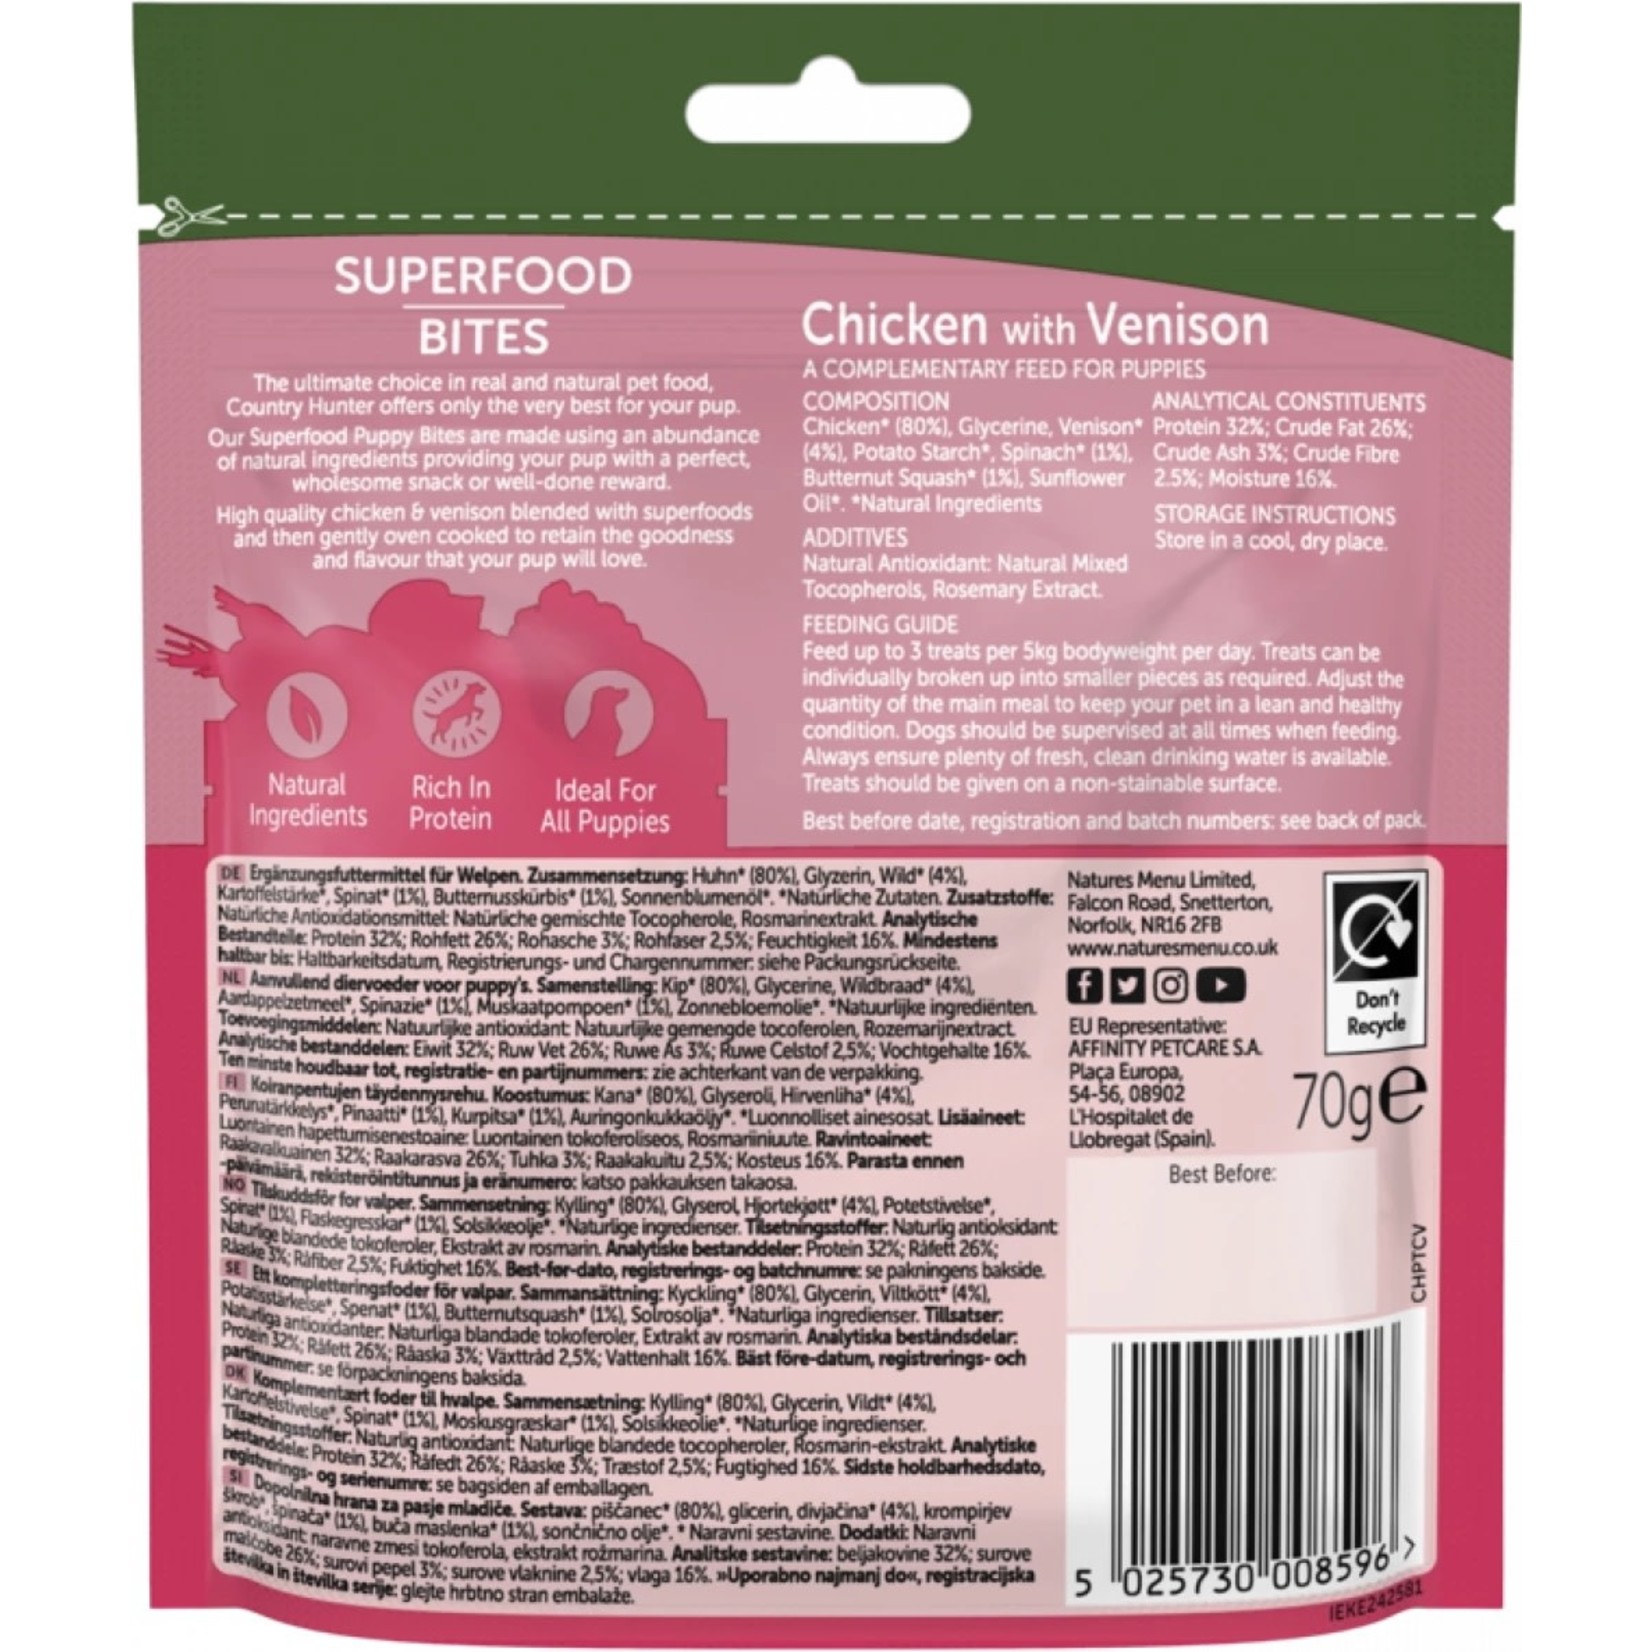 natures menu Country Hunter Superfood Bites Chicken with Venison Treats for Puppies, 70g